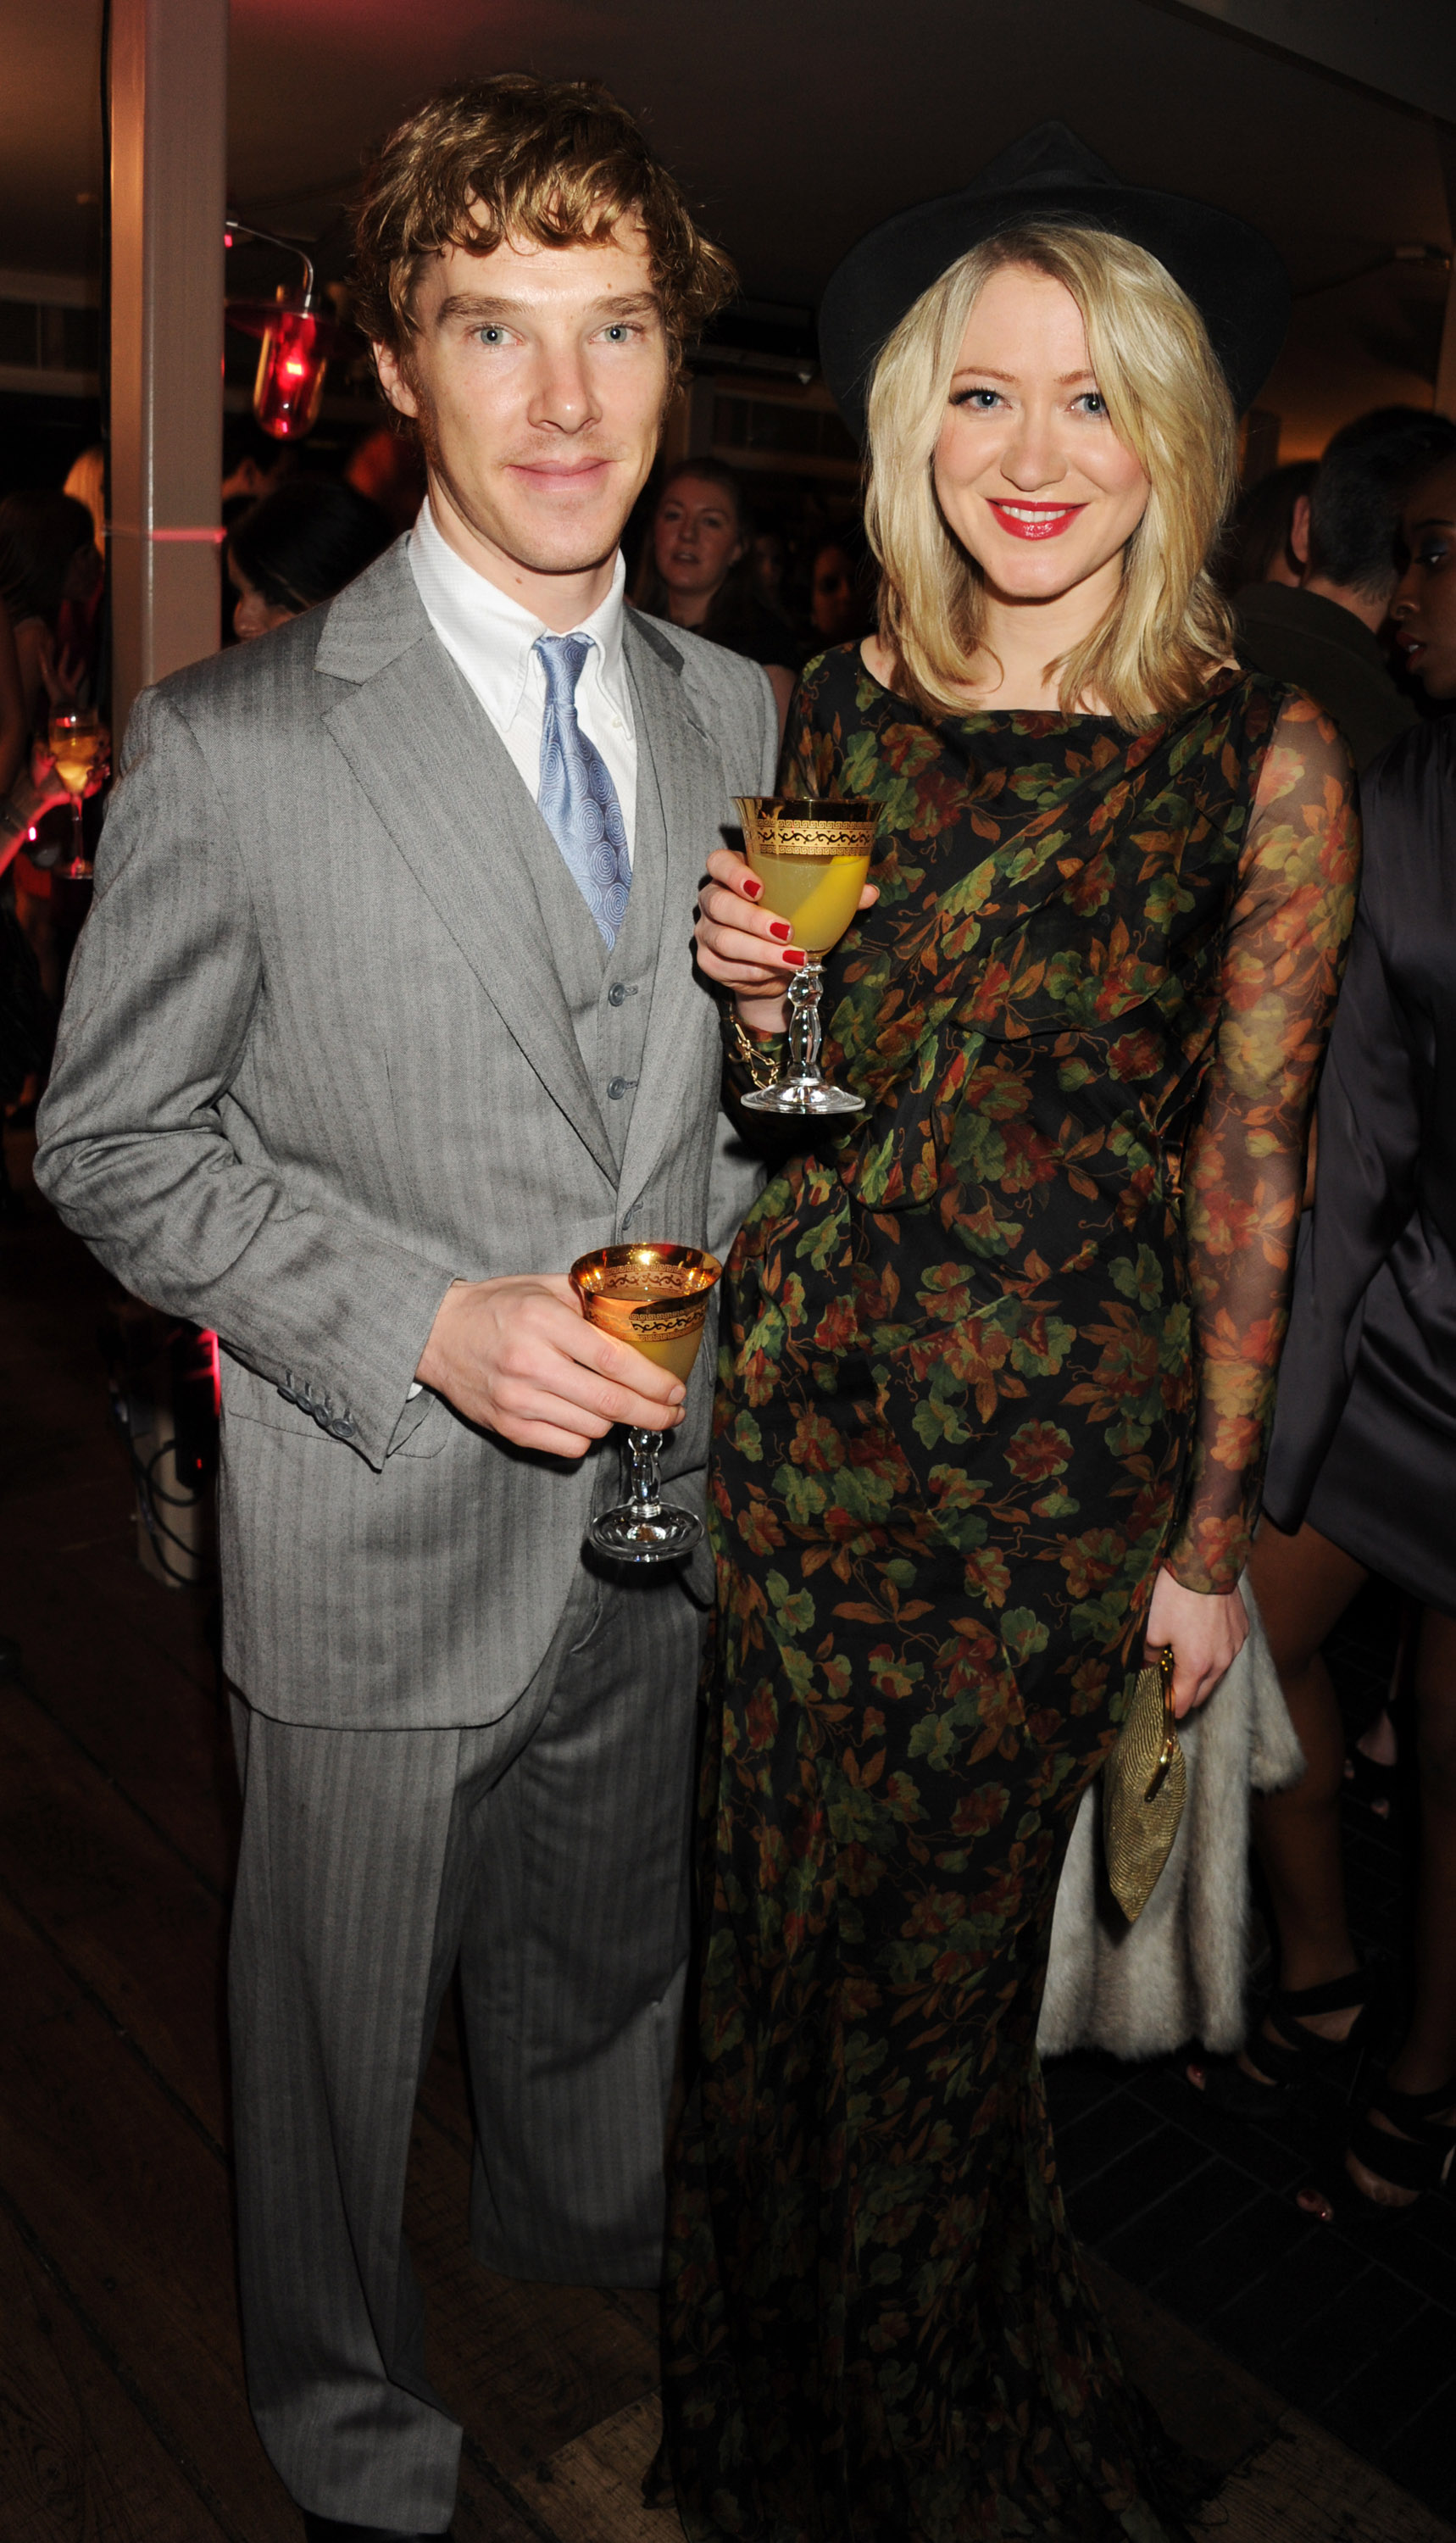 Benedsict cumberbatch and Siobhan Hewlett attend InStyle